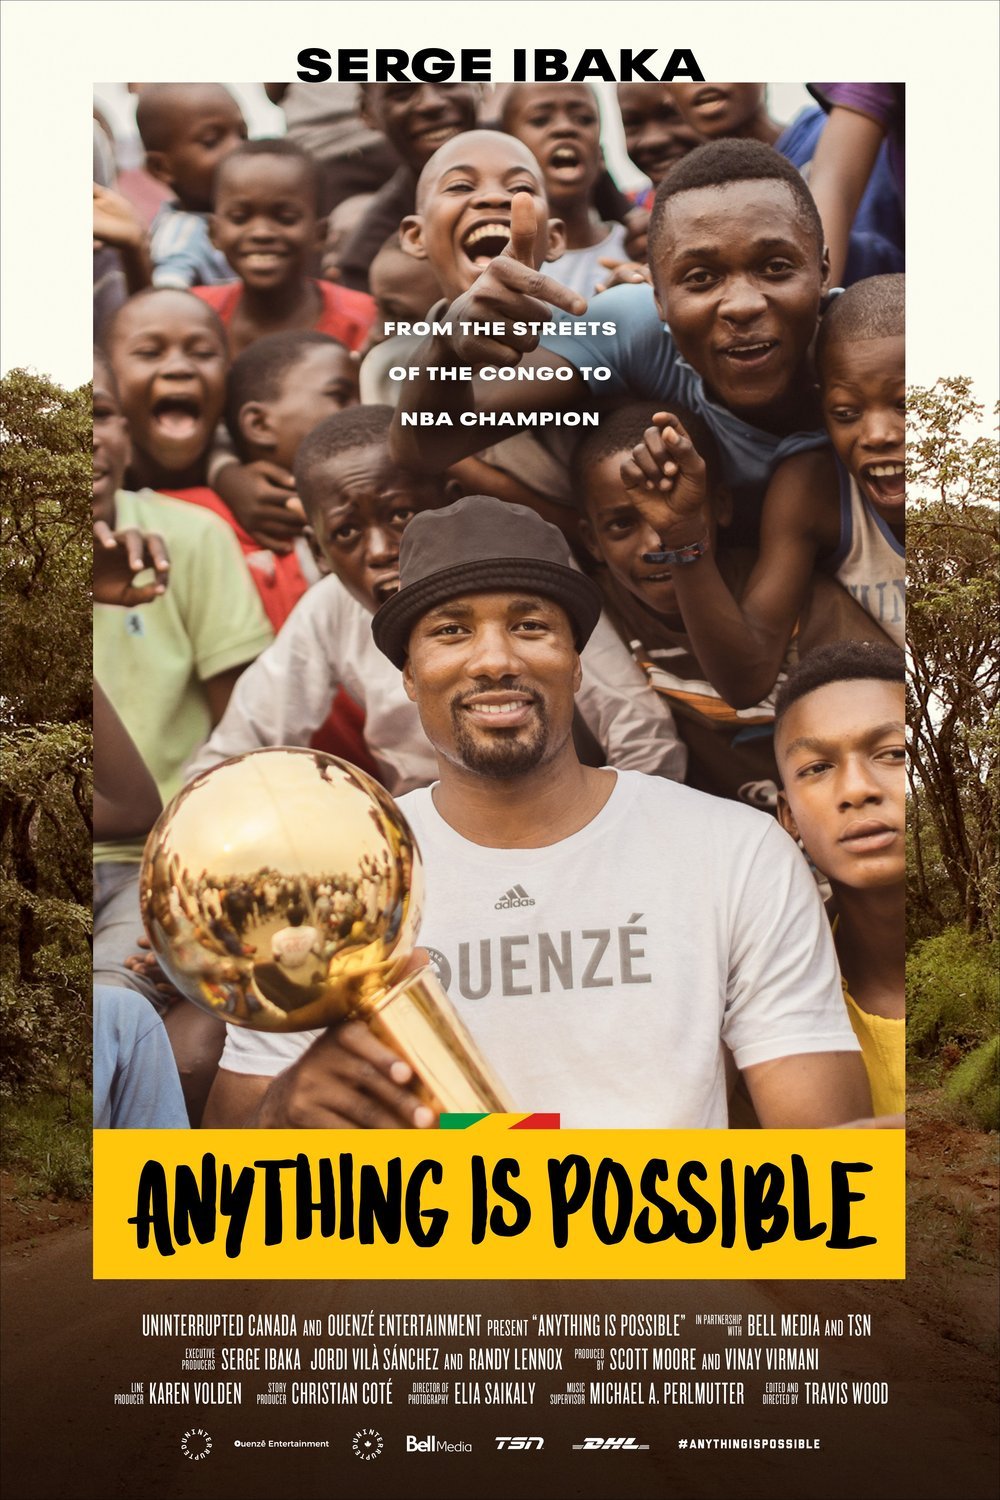 Poster of the movie Anything is Possible: A Serge Ibaka Story